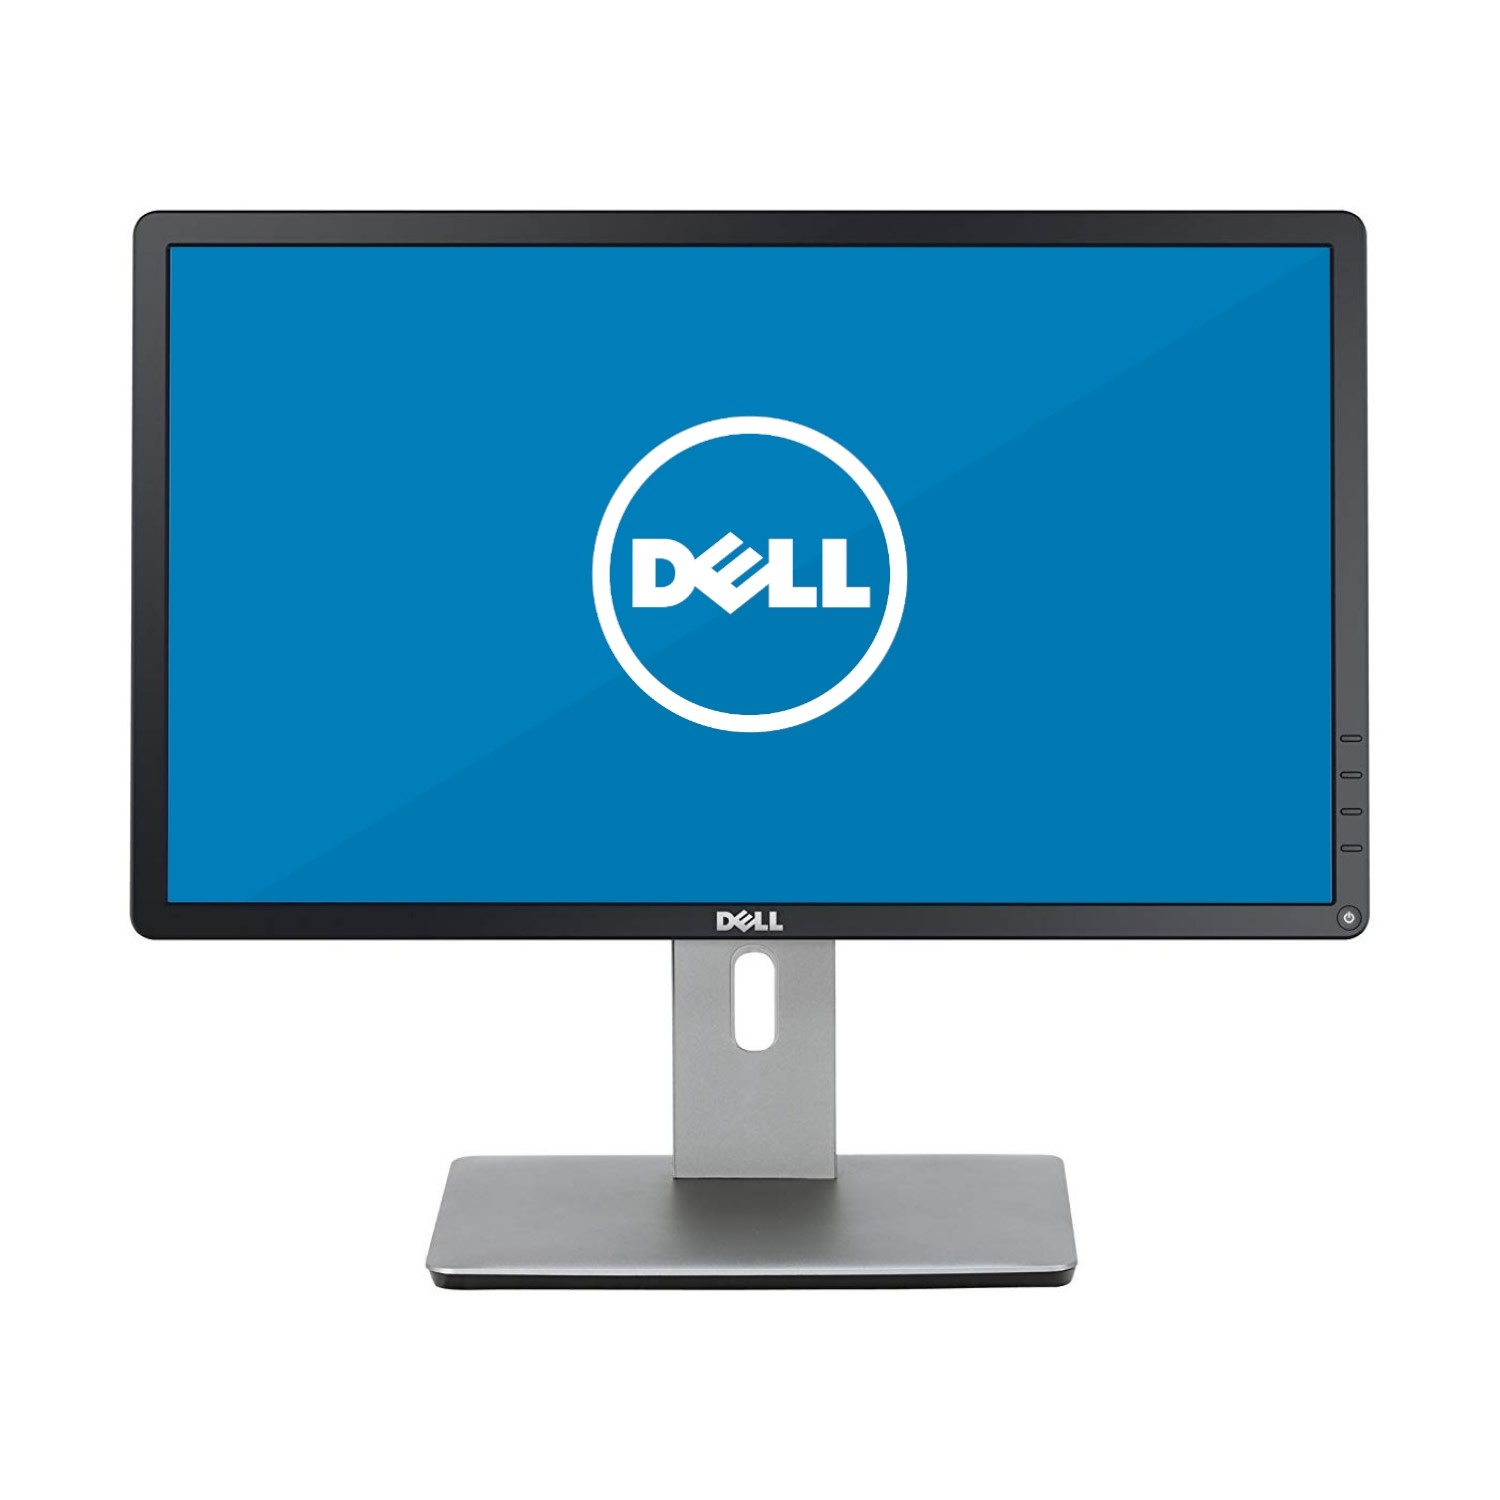 Dell P2214Hb 22 Inch Full HD IPS LED Monitor - Refurbished